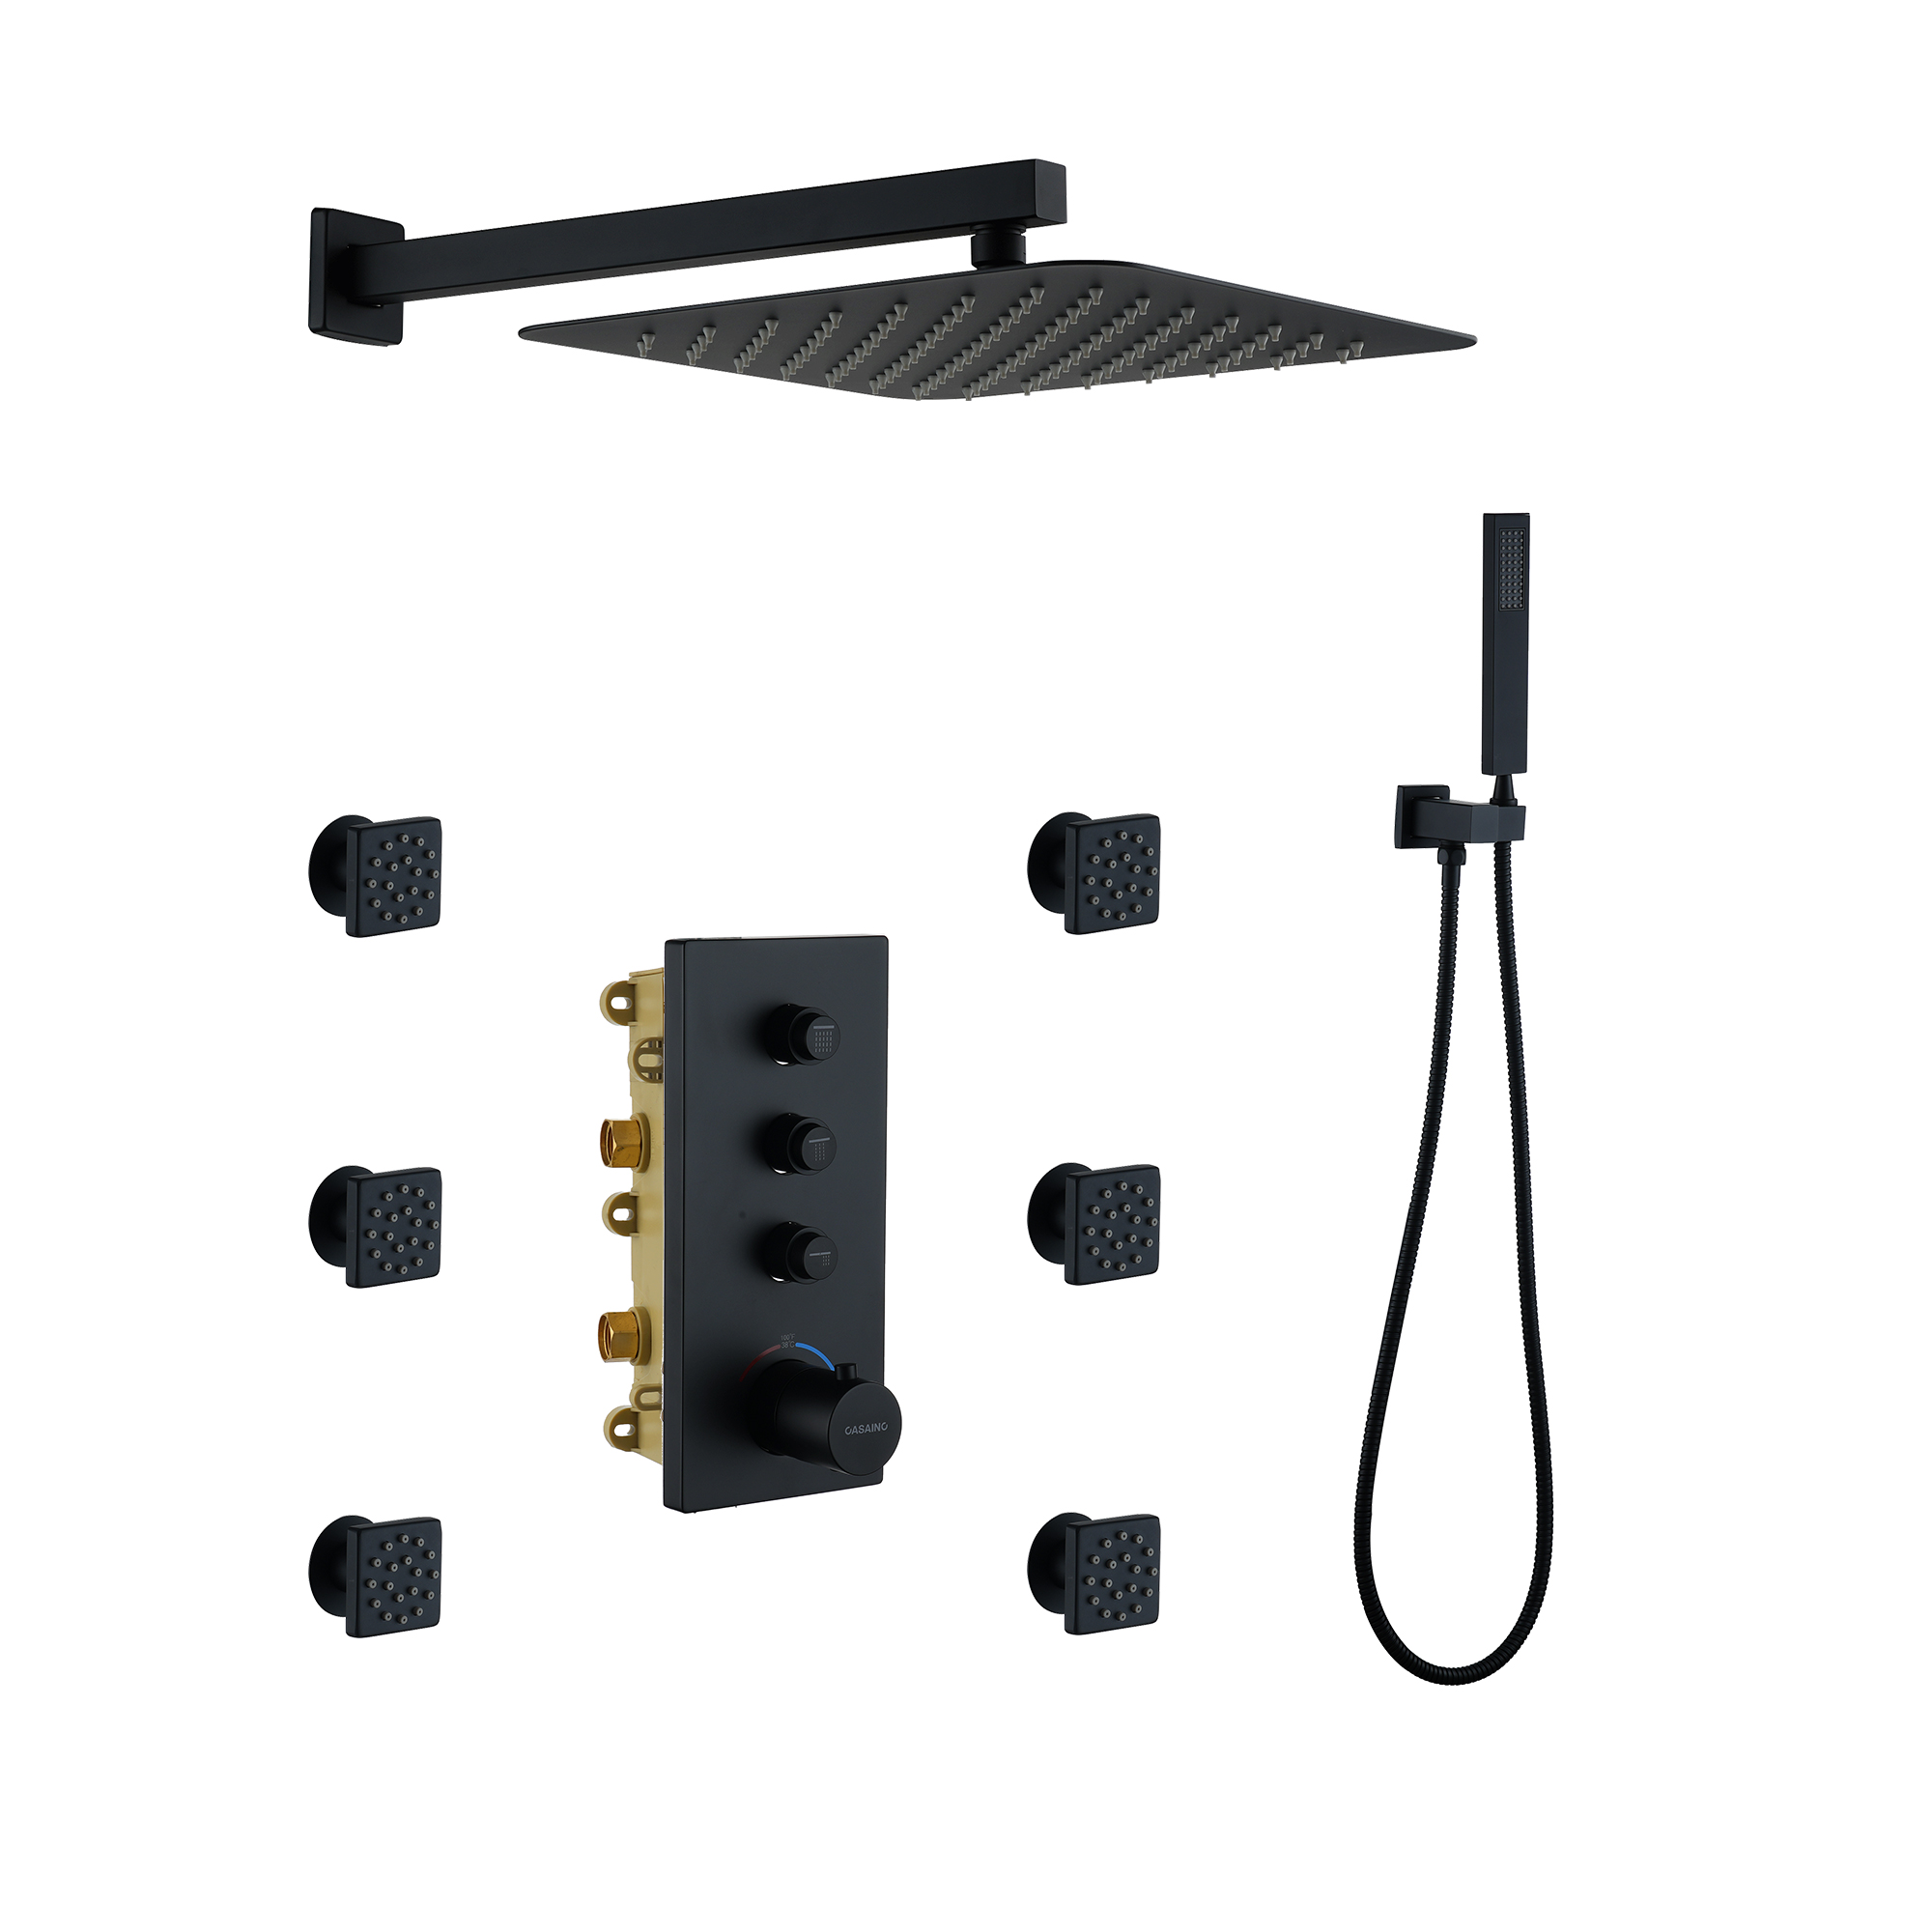 12 Inch Wall Mount Thermostatic Shower System with Body Sprays in Matte Black Finish, Rain Shower for Luxury Showering Experience